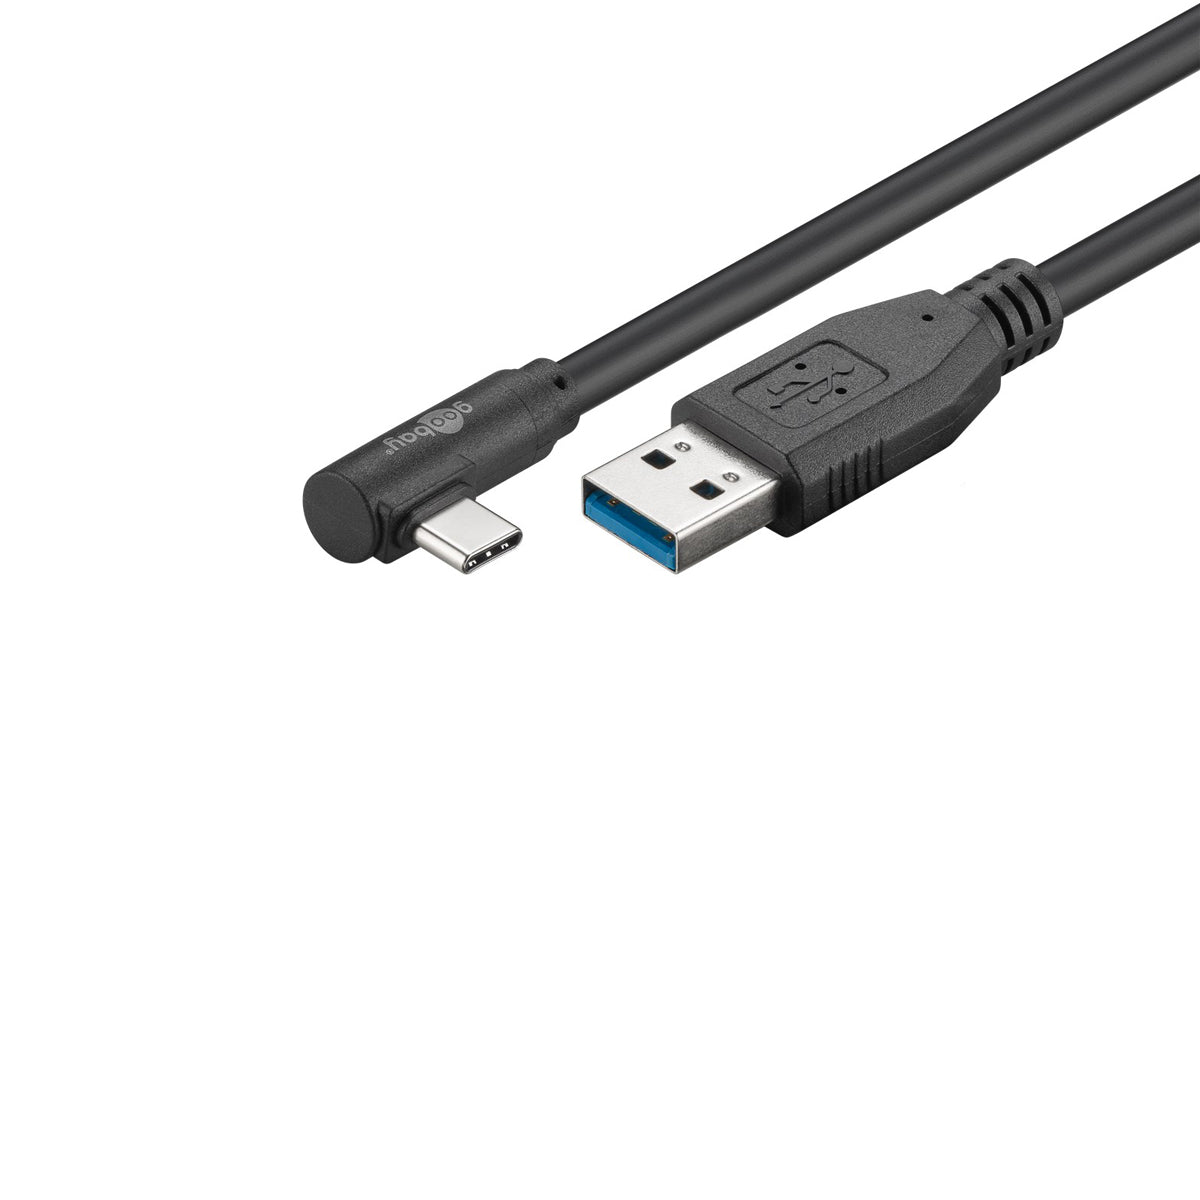 Goobay USB-C to USB A 3.0 Cable 0.5M for Mobiles - Black.